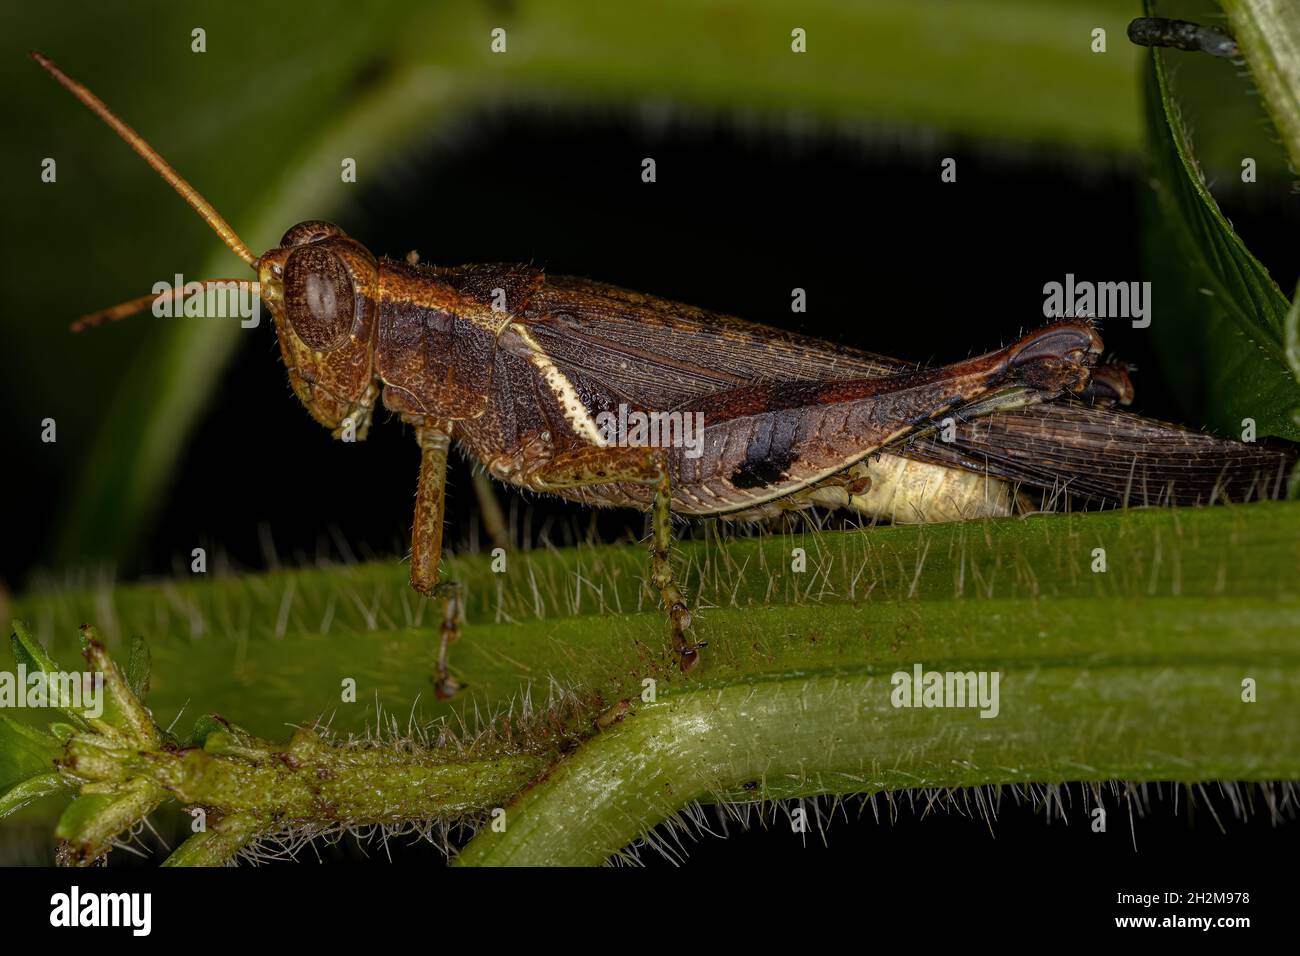 Adult Short-horned Grasshopper of the Family Acrididae Stock Photo - Alamy